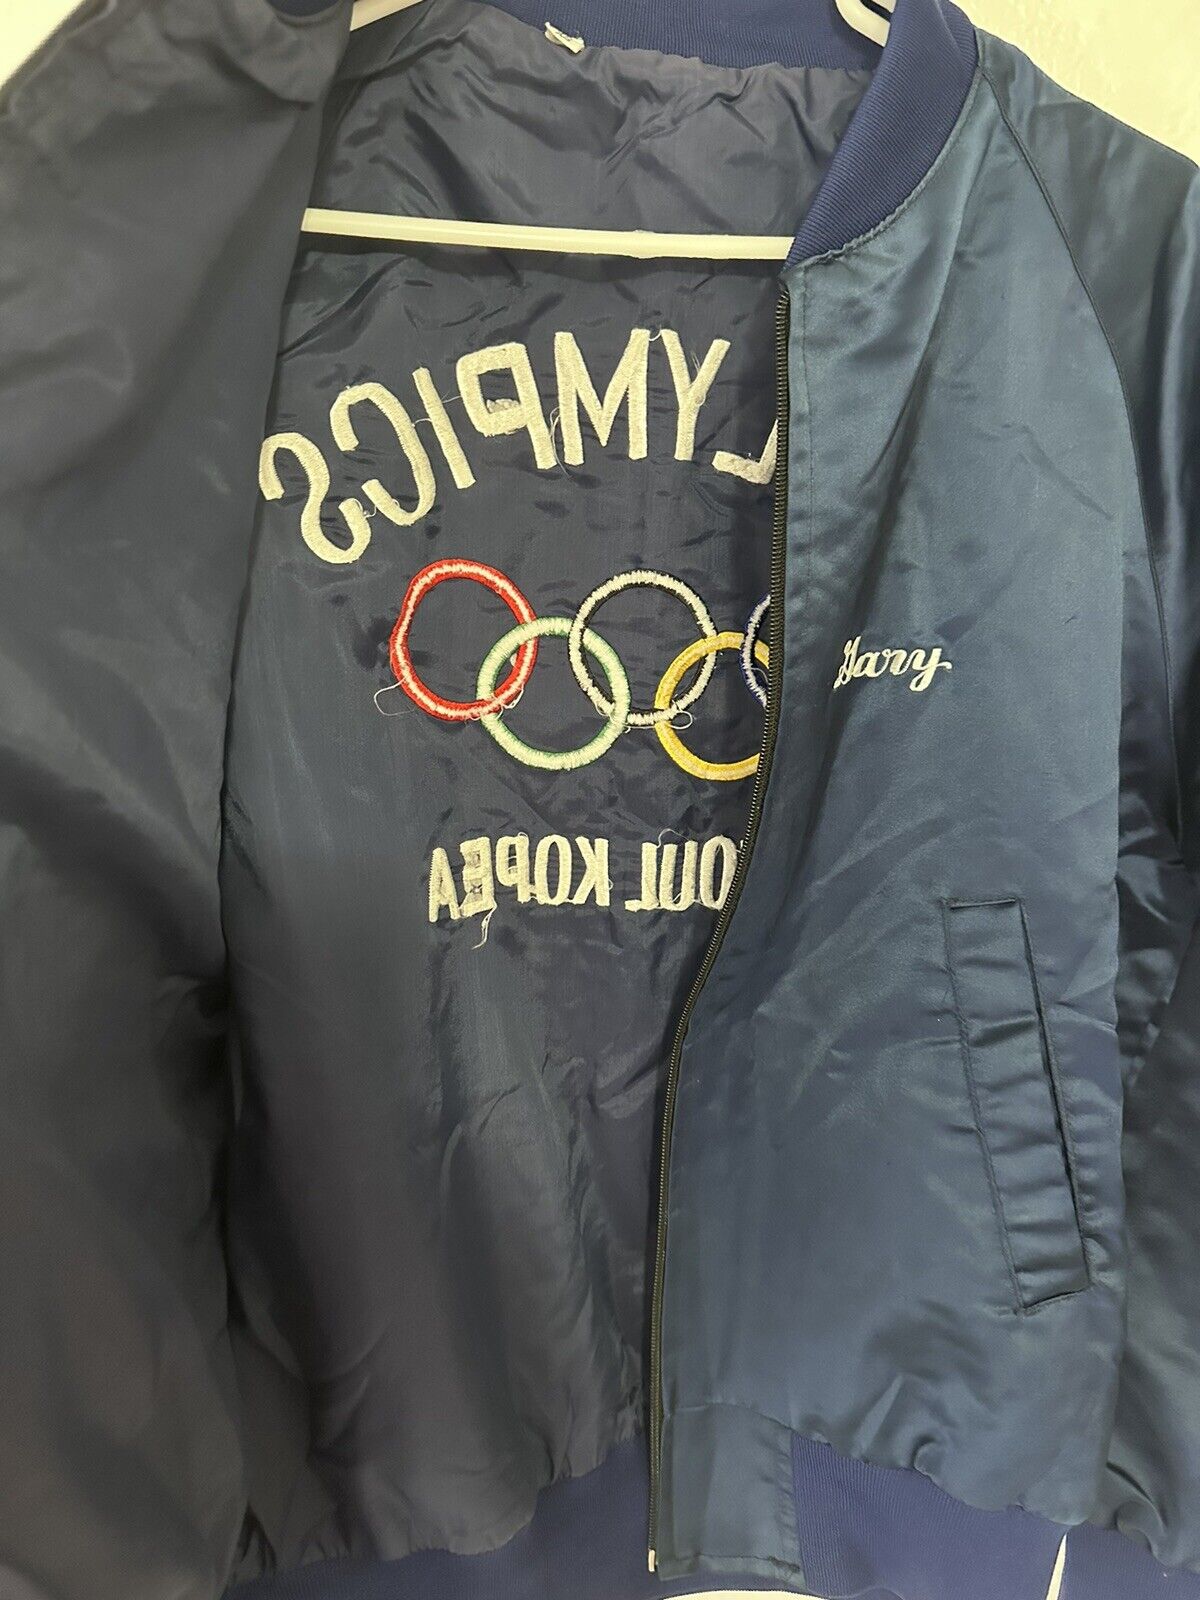 Rare Vintage 1988 Seoul Olympics Navy Bomber Jacket - Size XS, Embroidered 'Gary' - Unique Collectible Sports Memorabilia - TreasuTiques